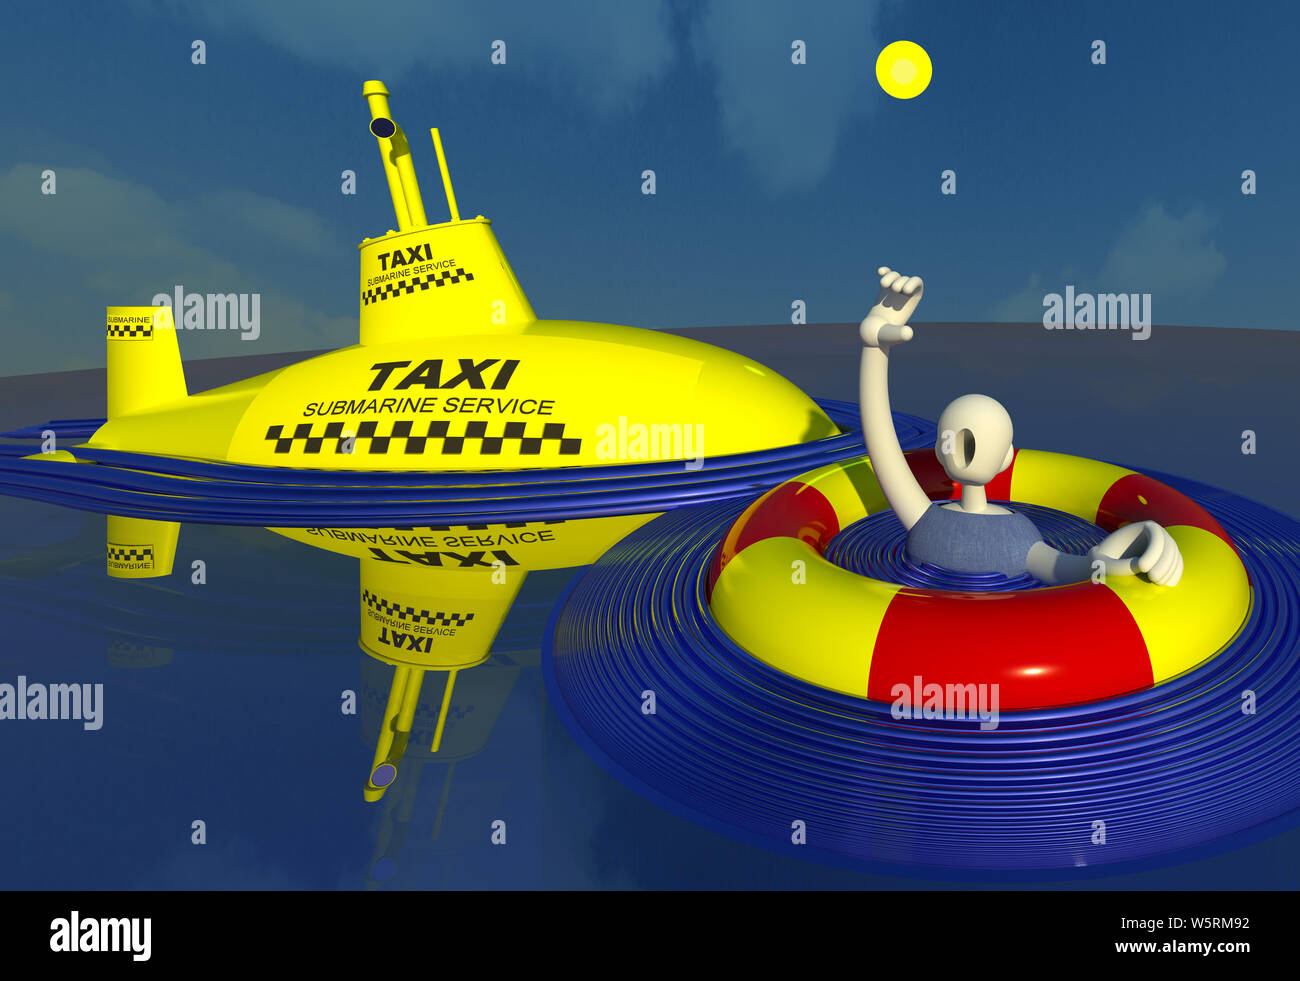 Unusual yellow cab submarine service in the sea 3D illustration 1. A drowning character calling a taxi in the middle of the ocean. Collection. Stock Photo